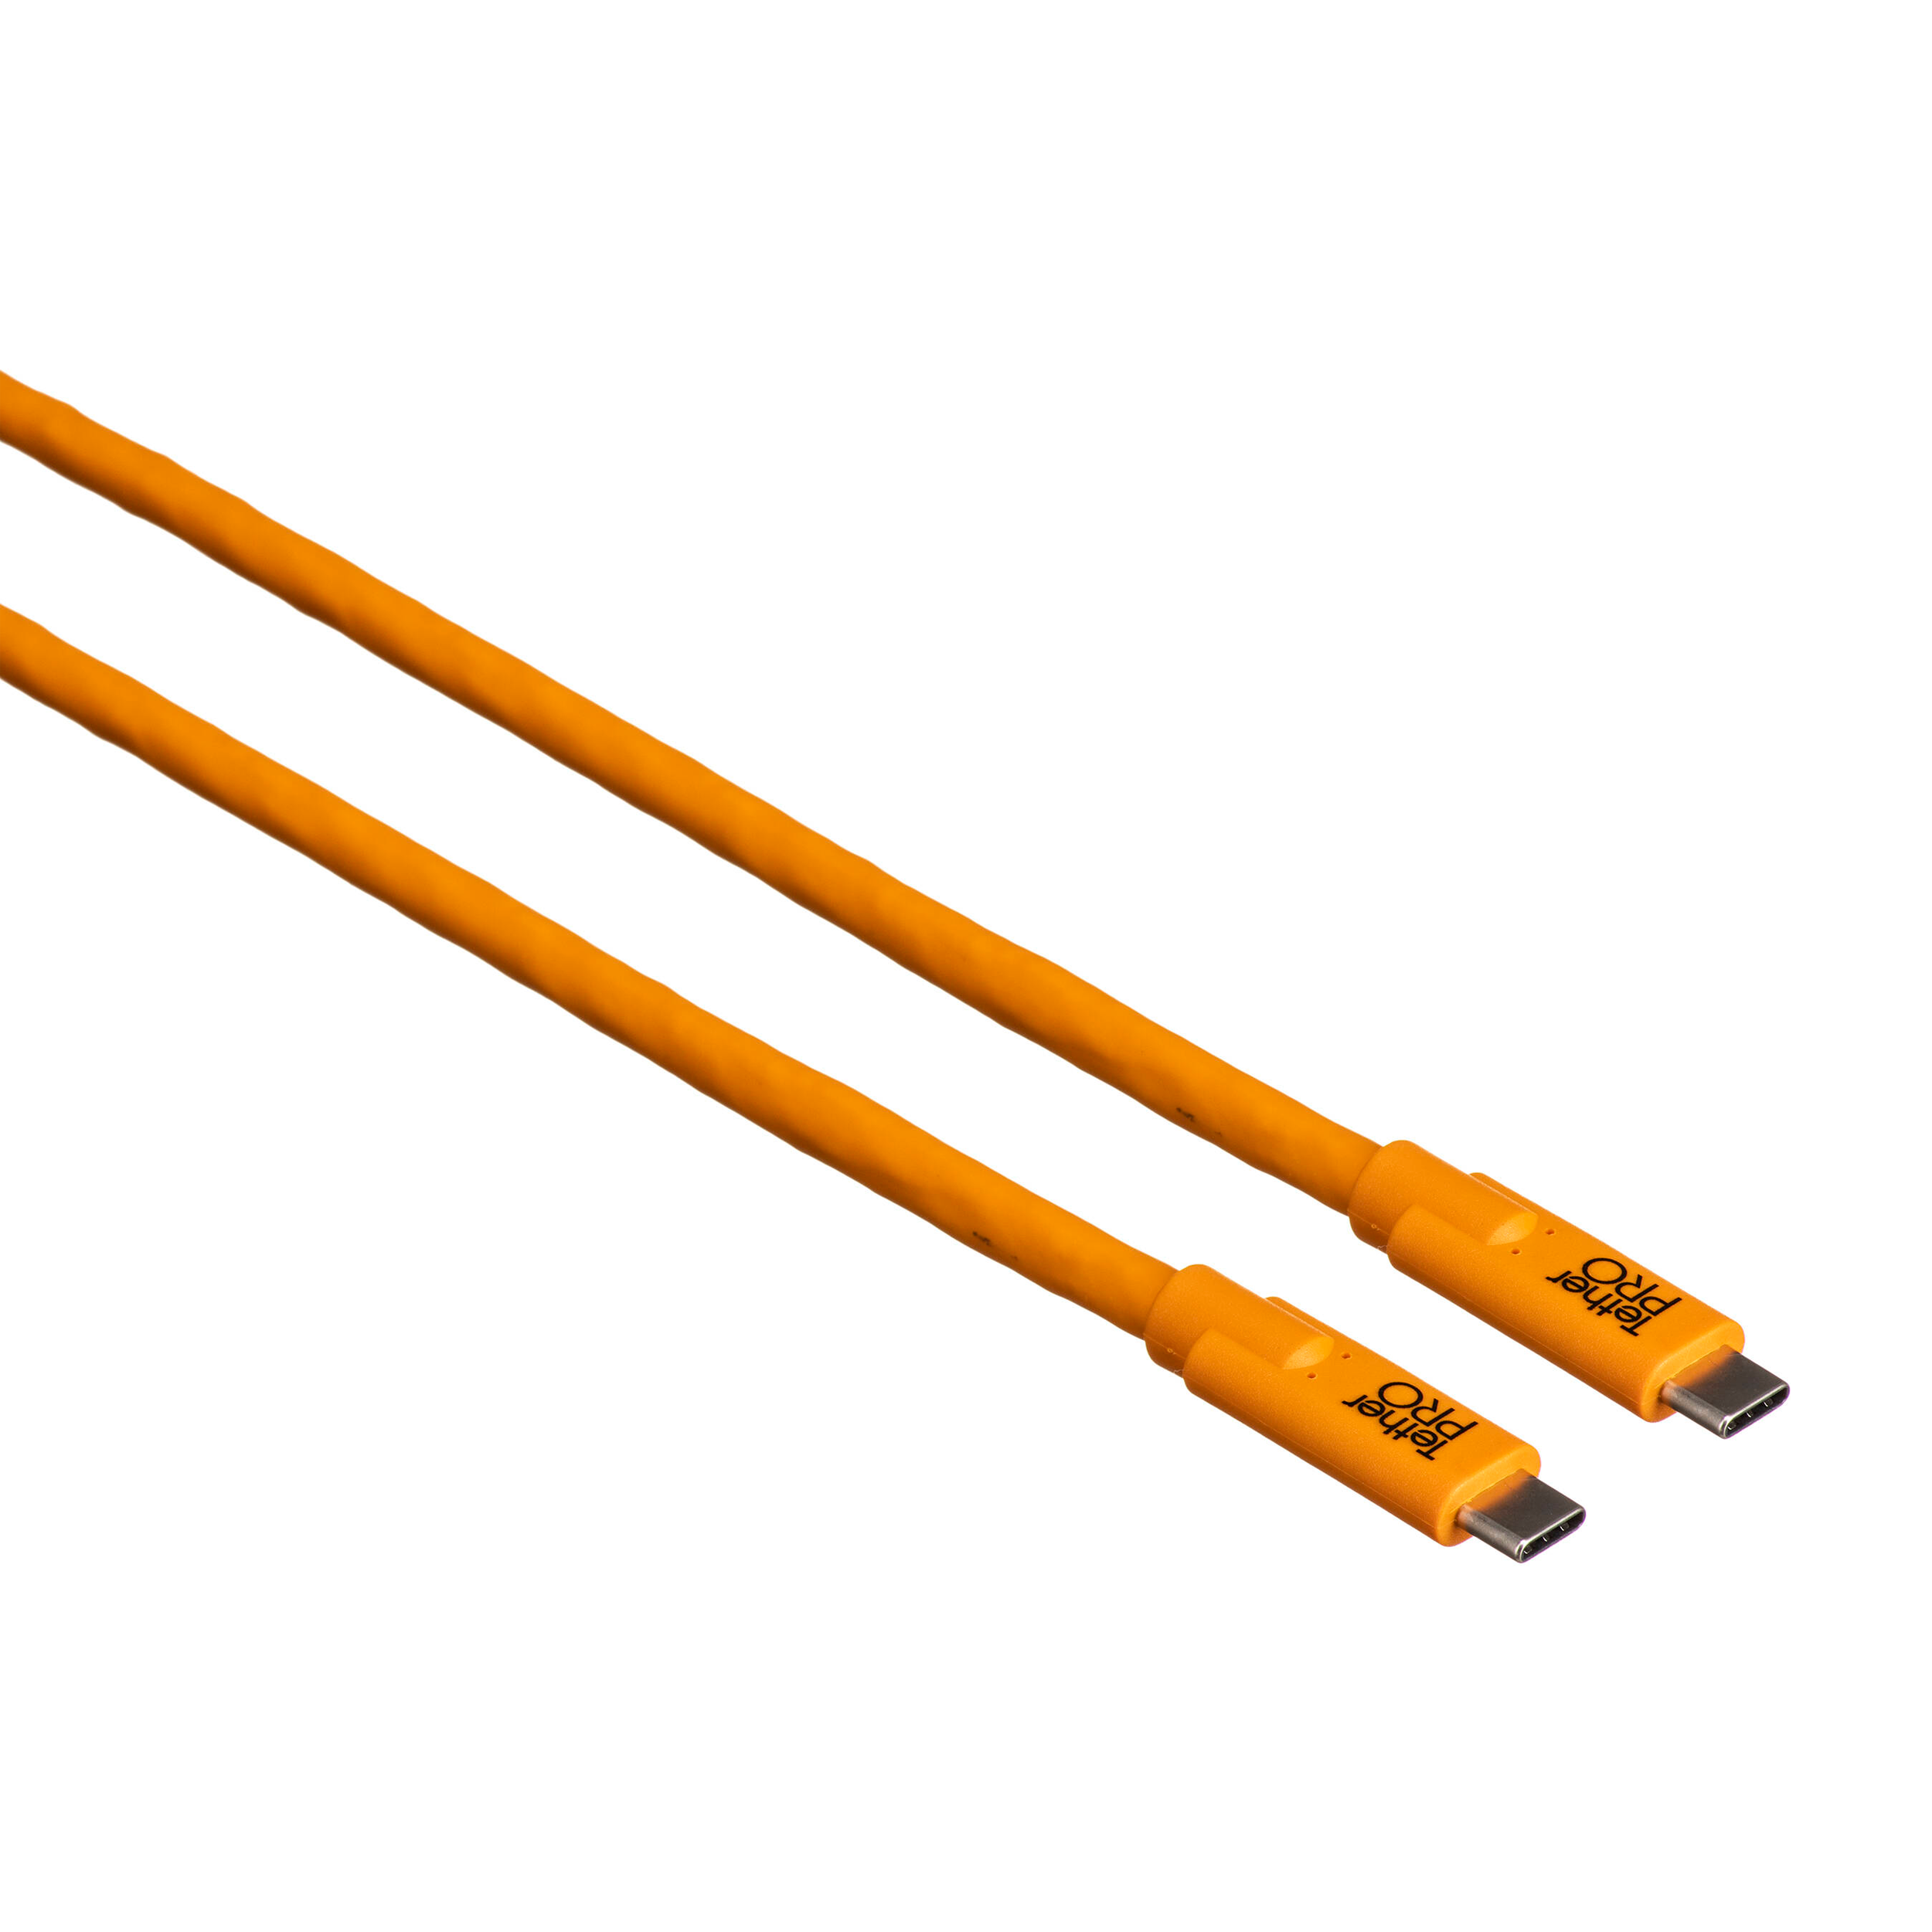 Tether Tools TetherPro USB Type-C Male to USB Type-C Male Cable - 15', Orange